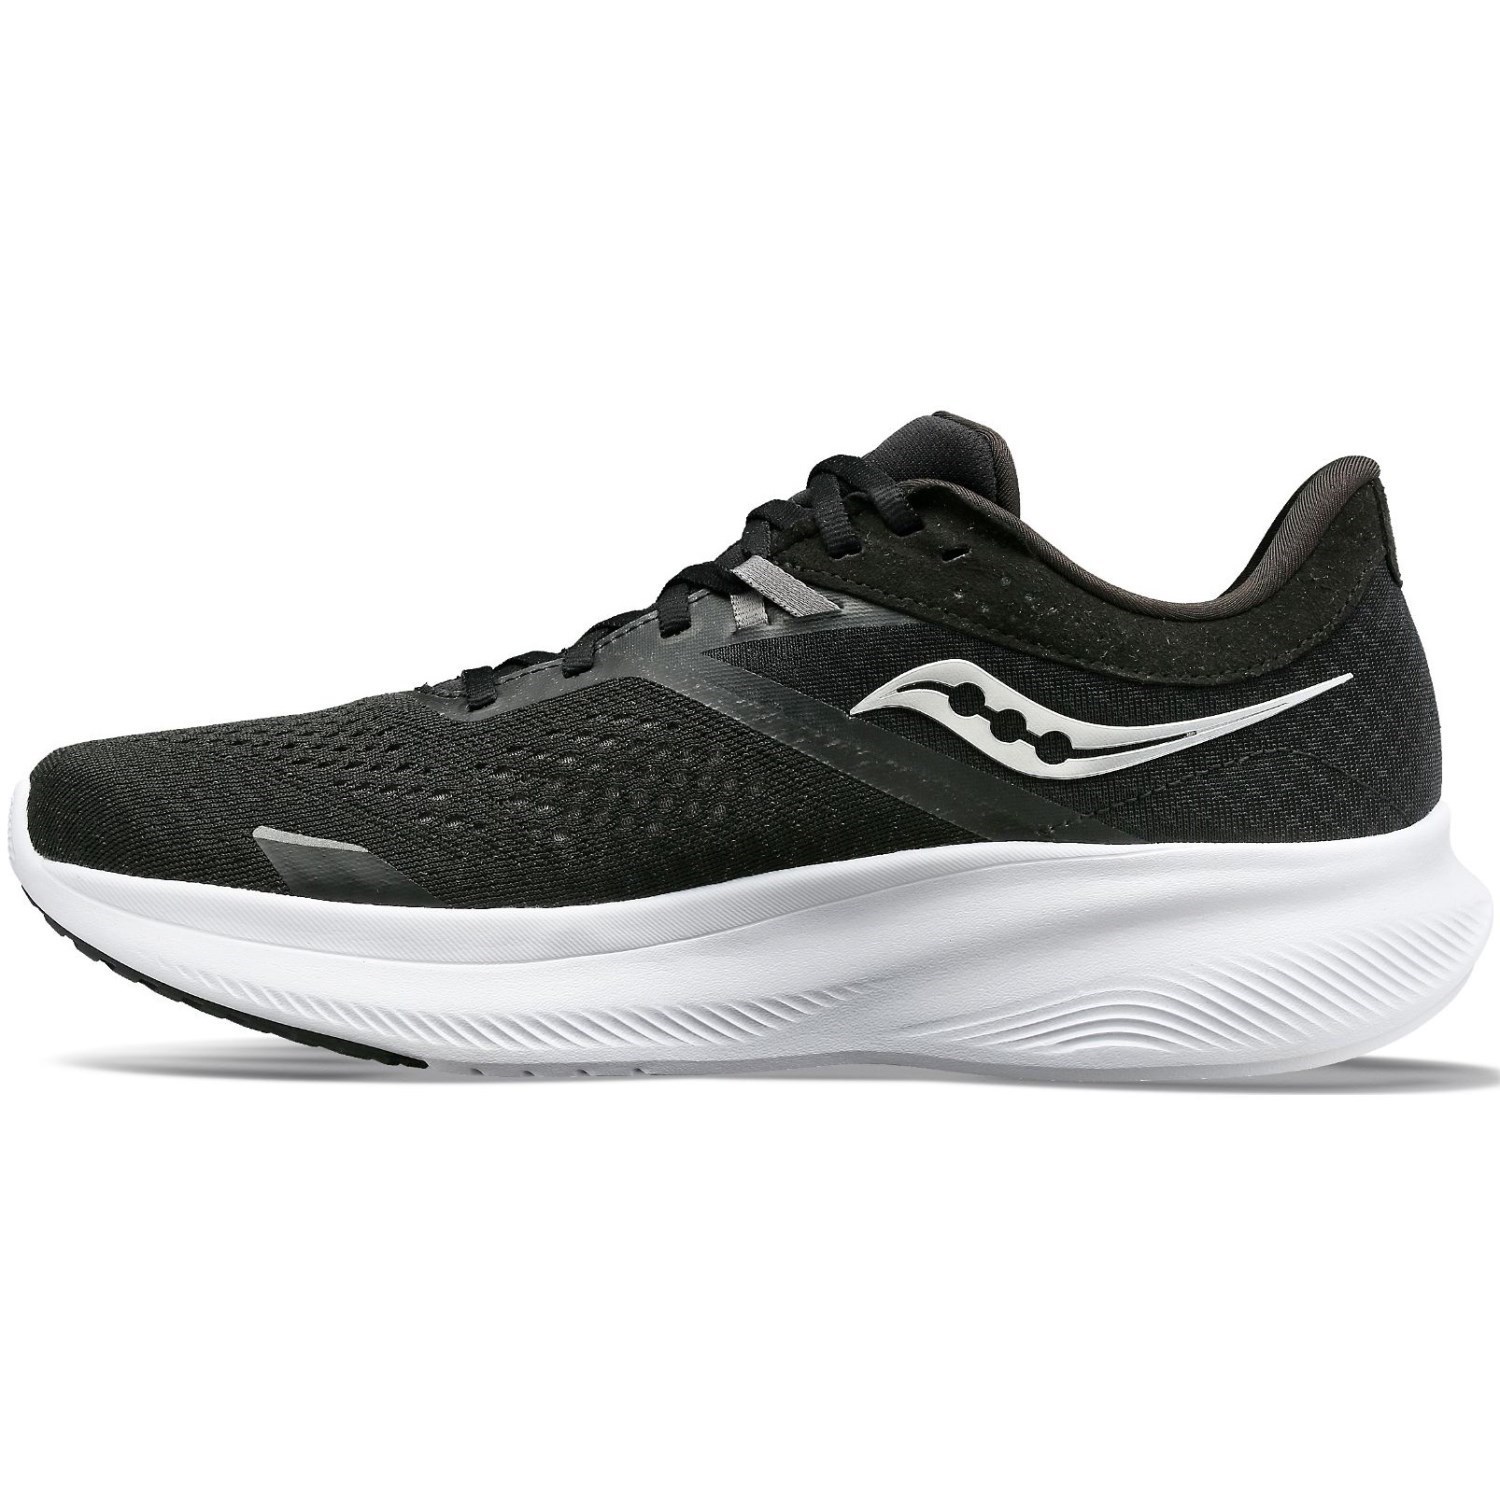 Saucony Ride 16 - Mens Running Shoes - Black/White | Sportitude